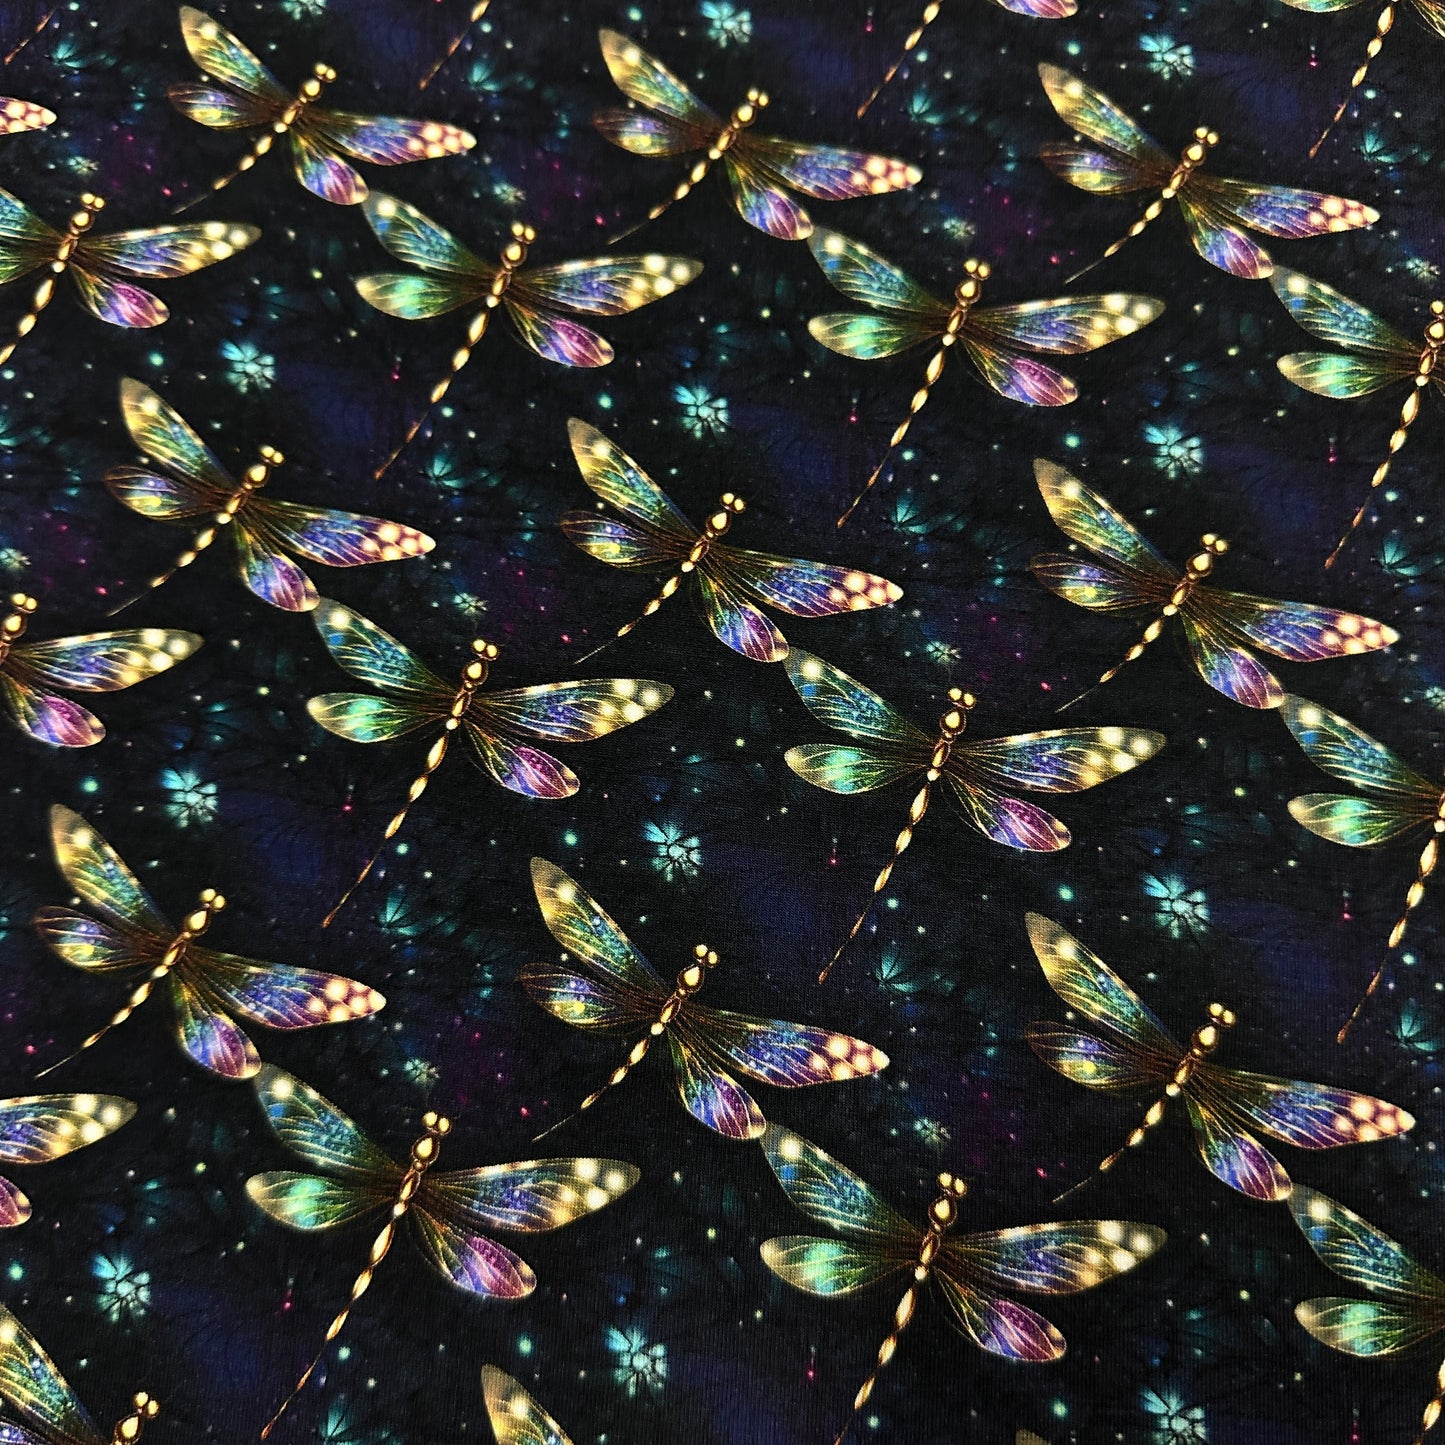 Shimmering Dragonflies on Organic Cotton/Spandex Jersey Fabric